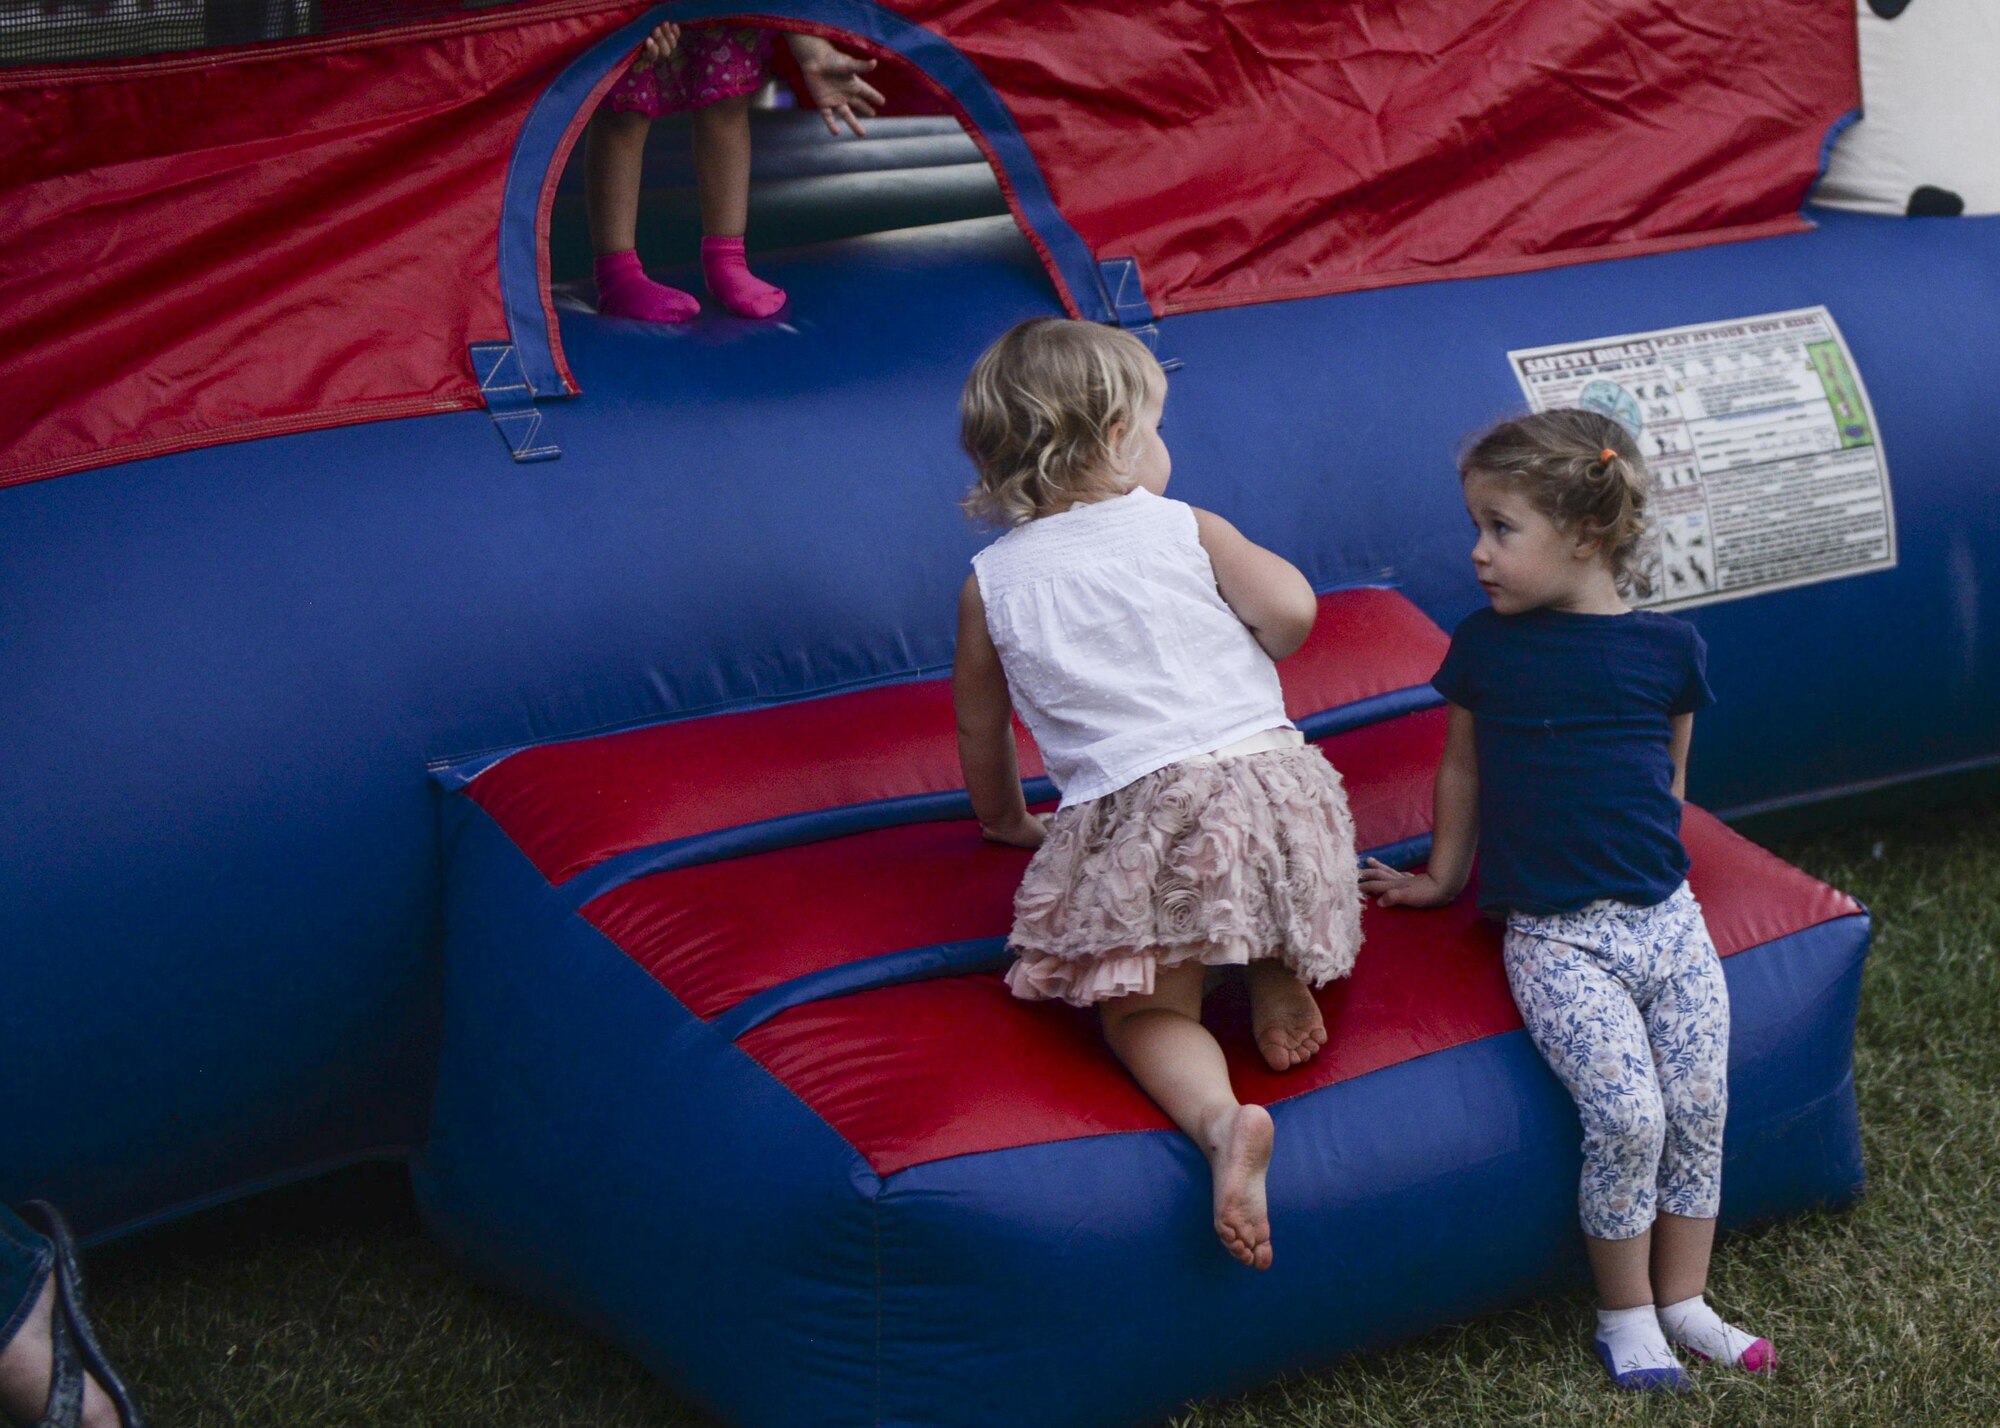 Two young children sit outside a bouncy house during the annual Zoo After Hours event at Alameda Park Zoo in Alamogordo, N.M. on Sept. 24, 2016. The event featured a variety of child-friendly activities including an obstacle course, a bouncy-house and a giant inflatable slide. (U.S. Air Force photo by Airman 1st Class Alexis P. Docherty)